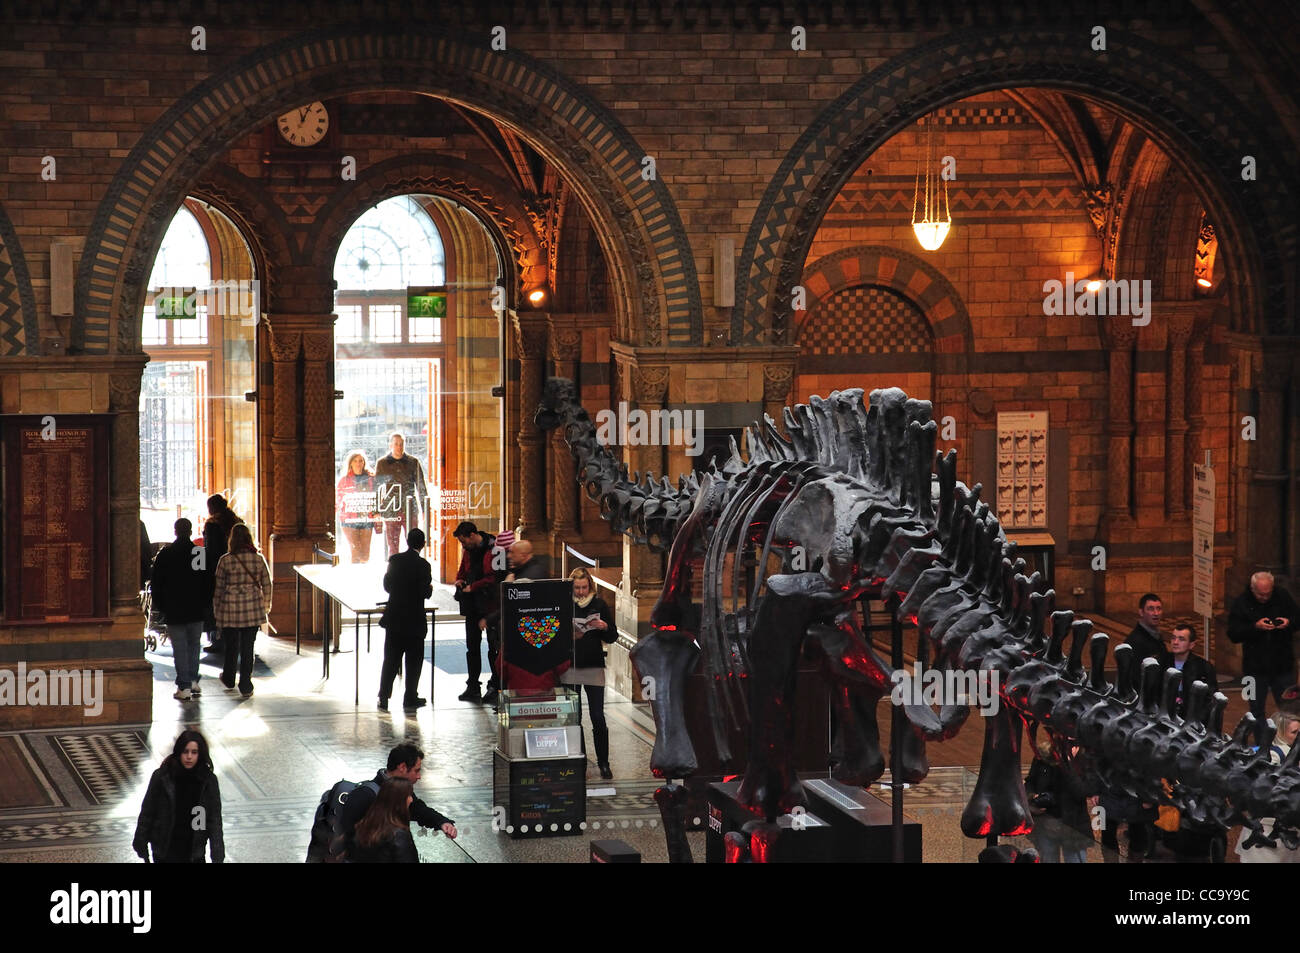 Dinosaur skeleton in Central Hall at Natural History Museum, Cromwell Road, Kensington, Greater London, England, United Kingdom Stock Photo